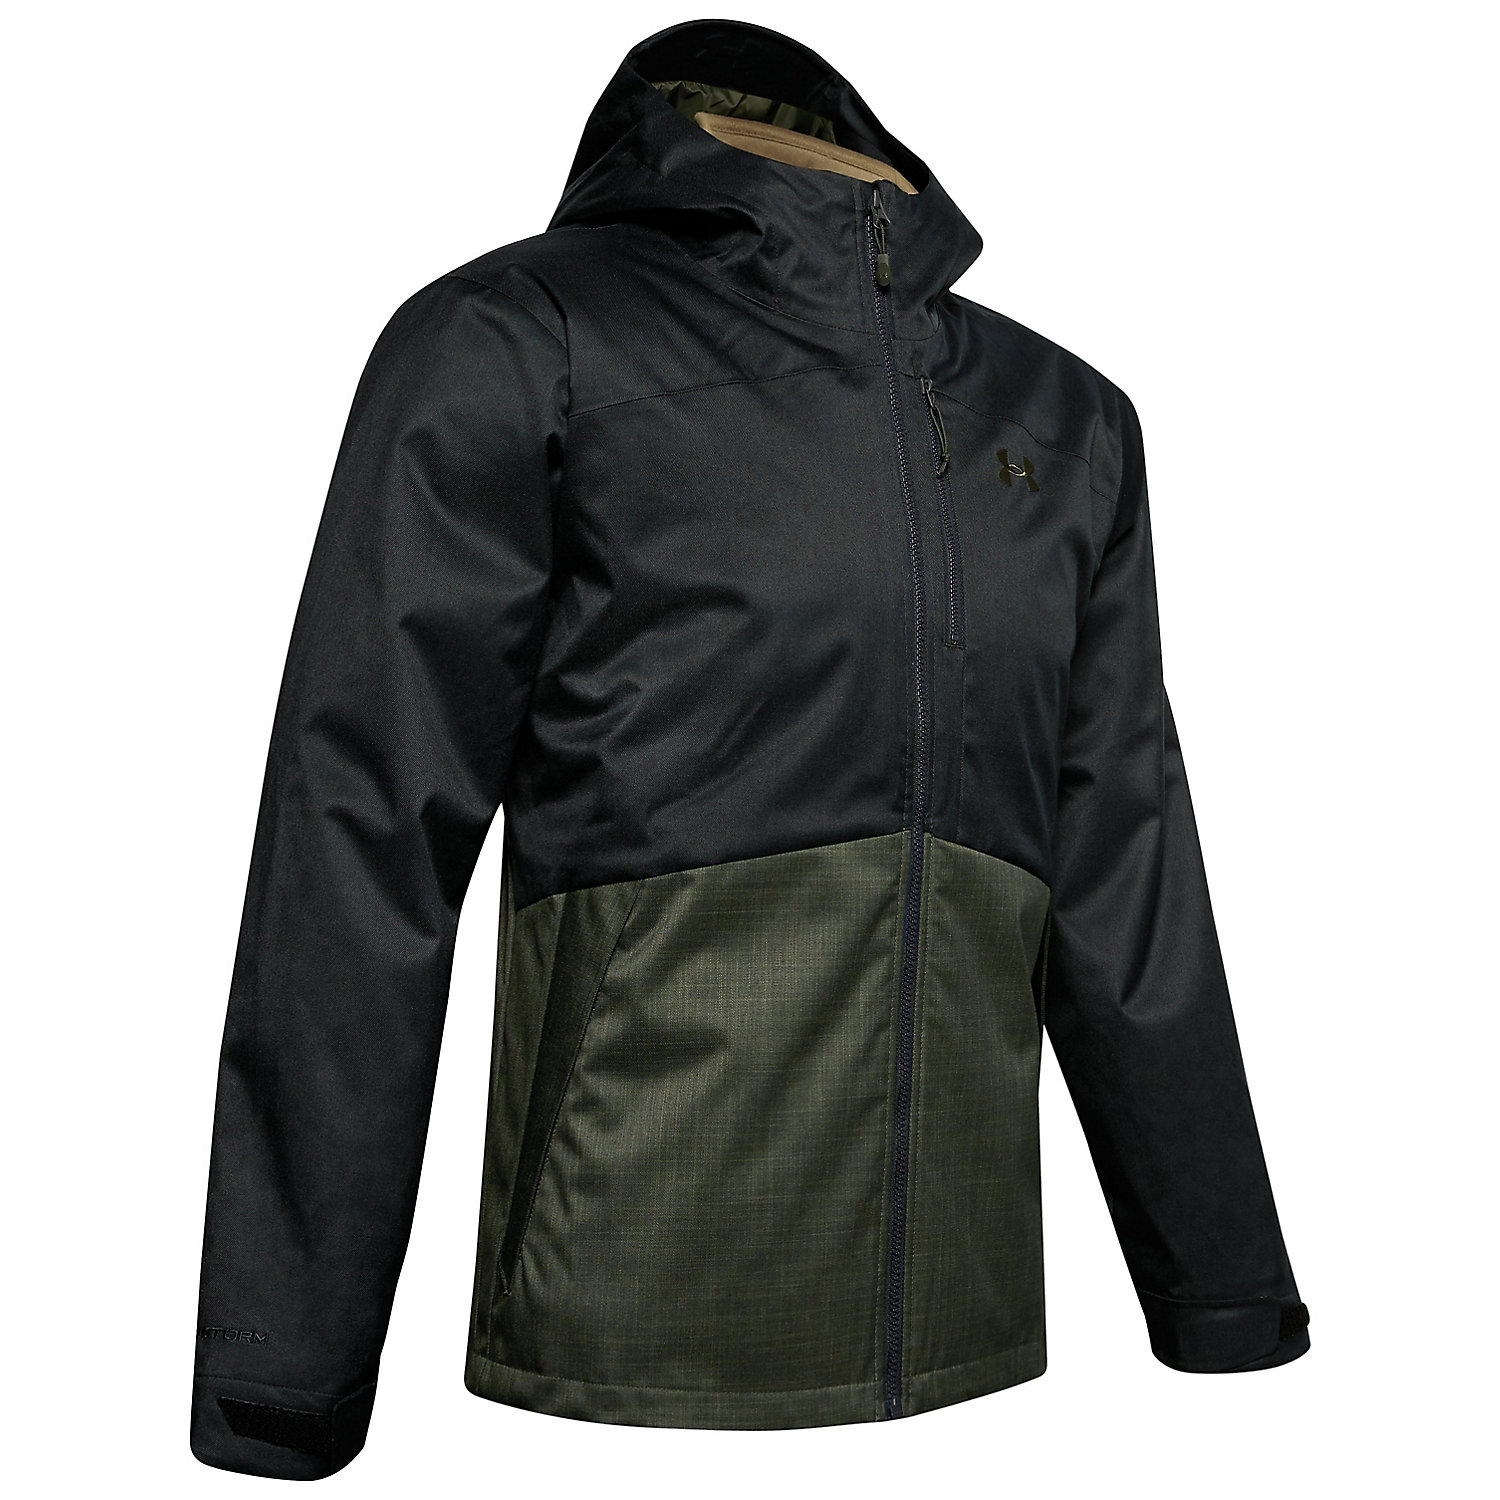 Under Armour Mens Porter 3-IN-1 Jacket